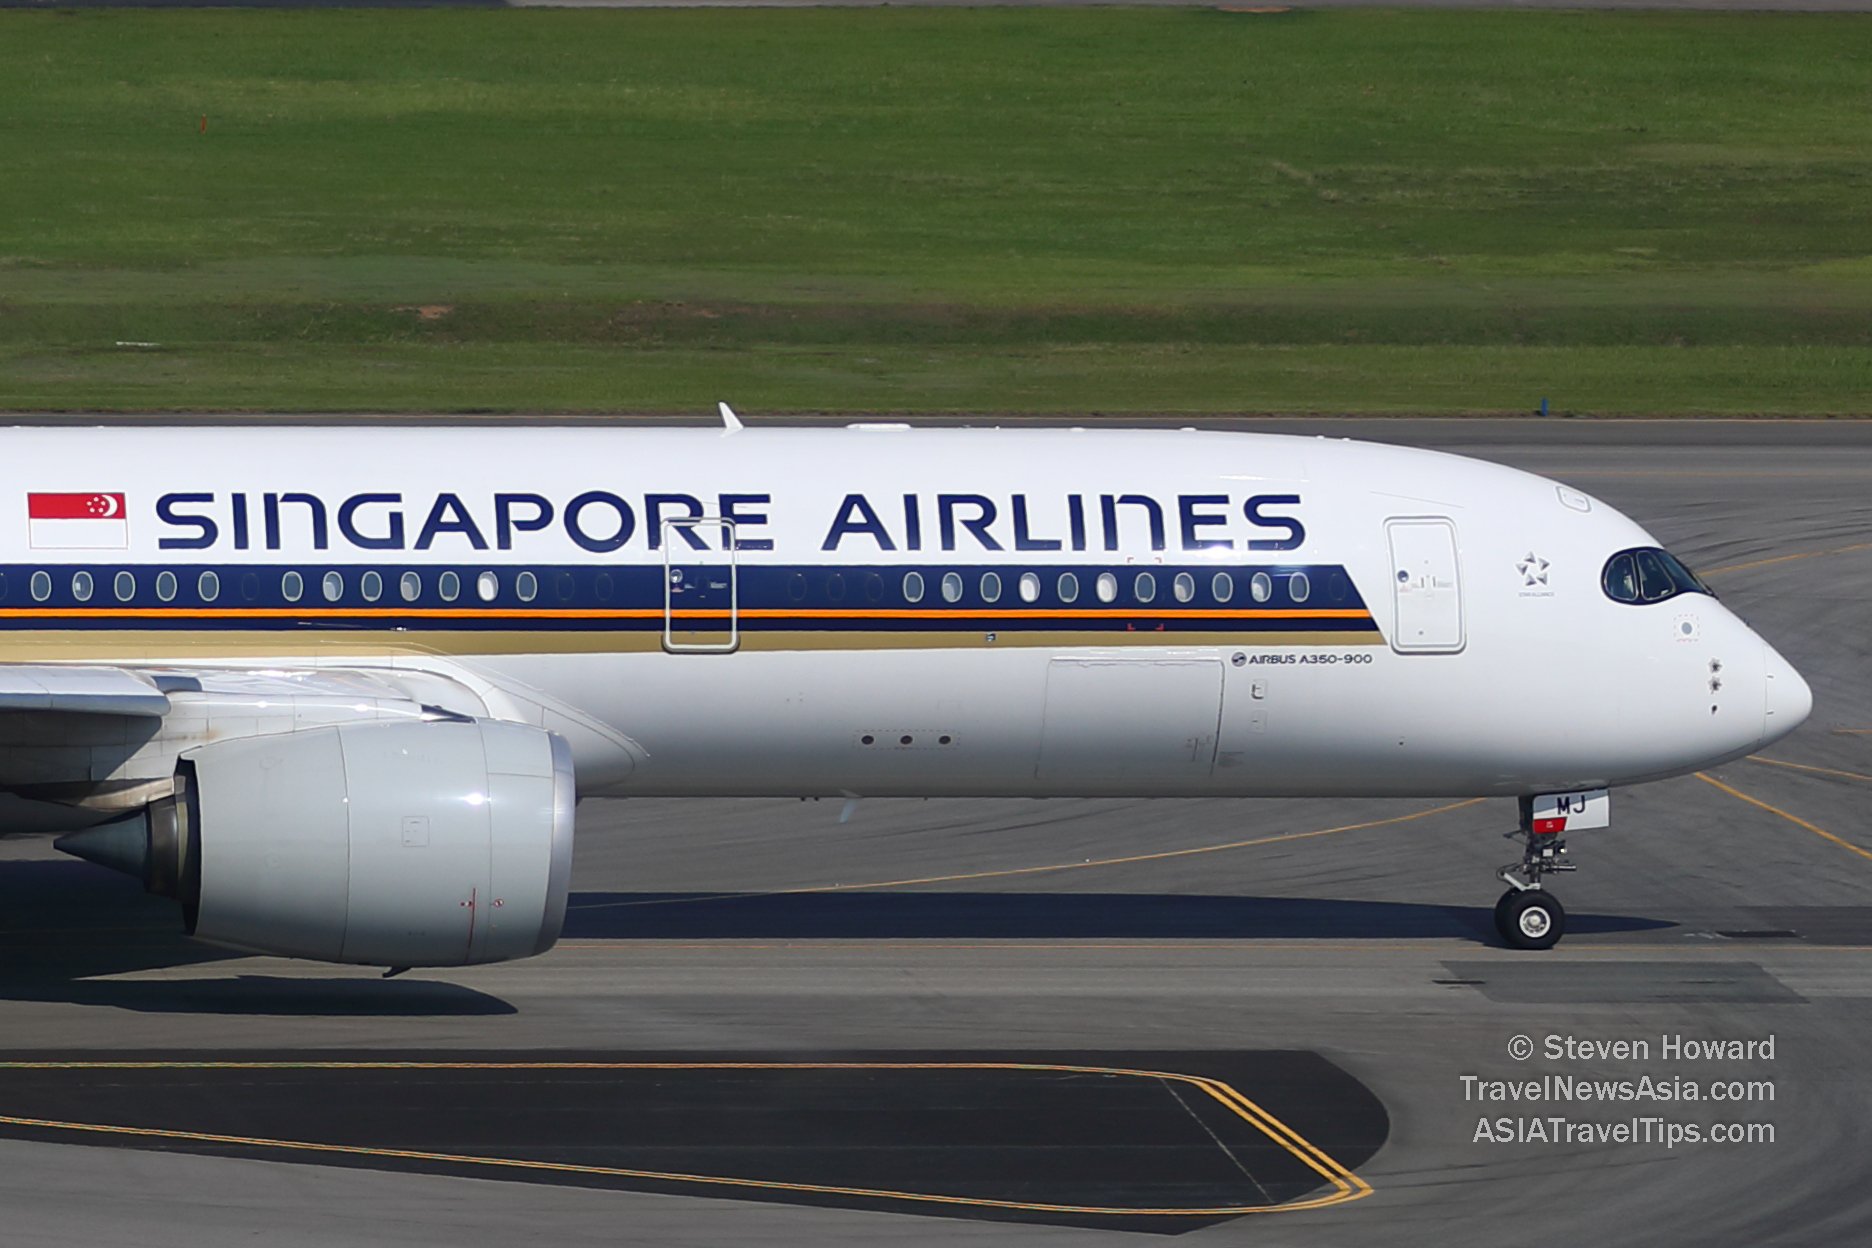 Singapore Airlines Airbus A350-900.jpg. Picture by Steven Howard of TravelNewsAsia.com Click to enlarge.